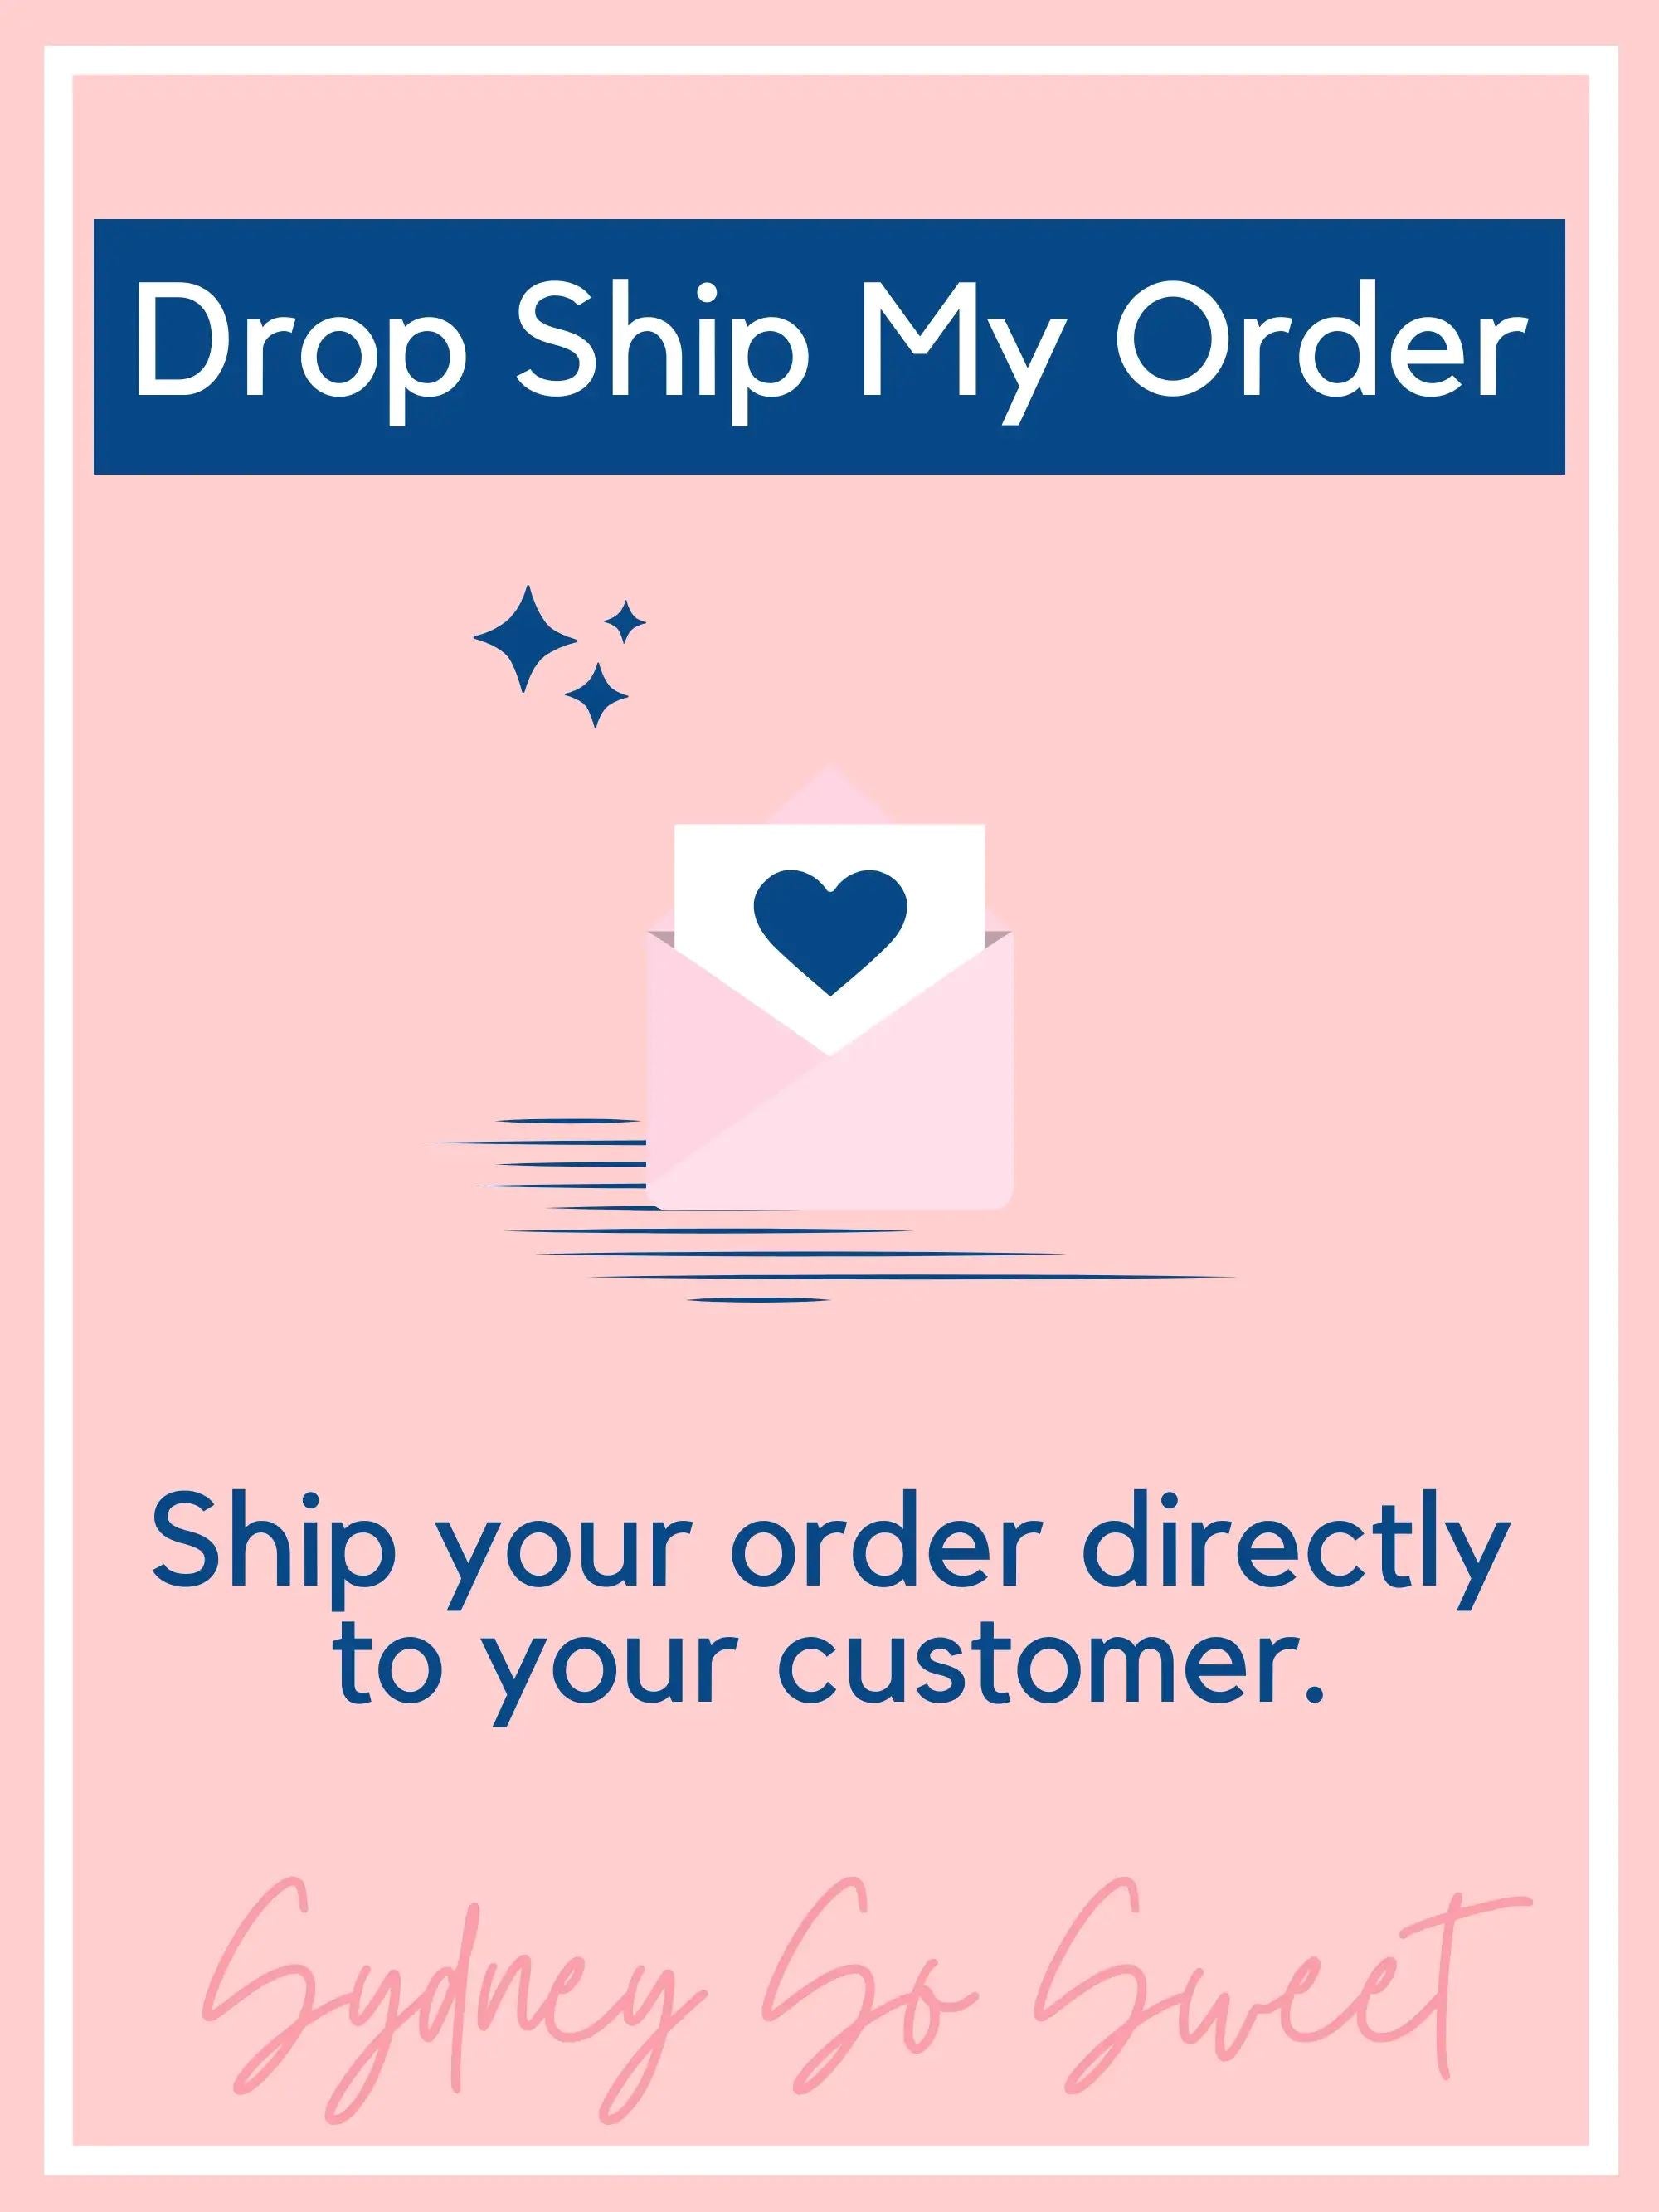 Drop Ship My Order from Sydney So Sweet